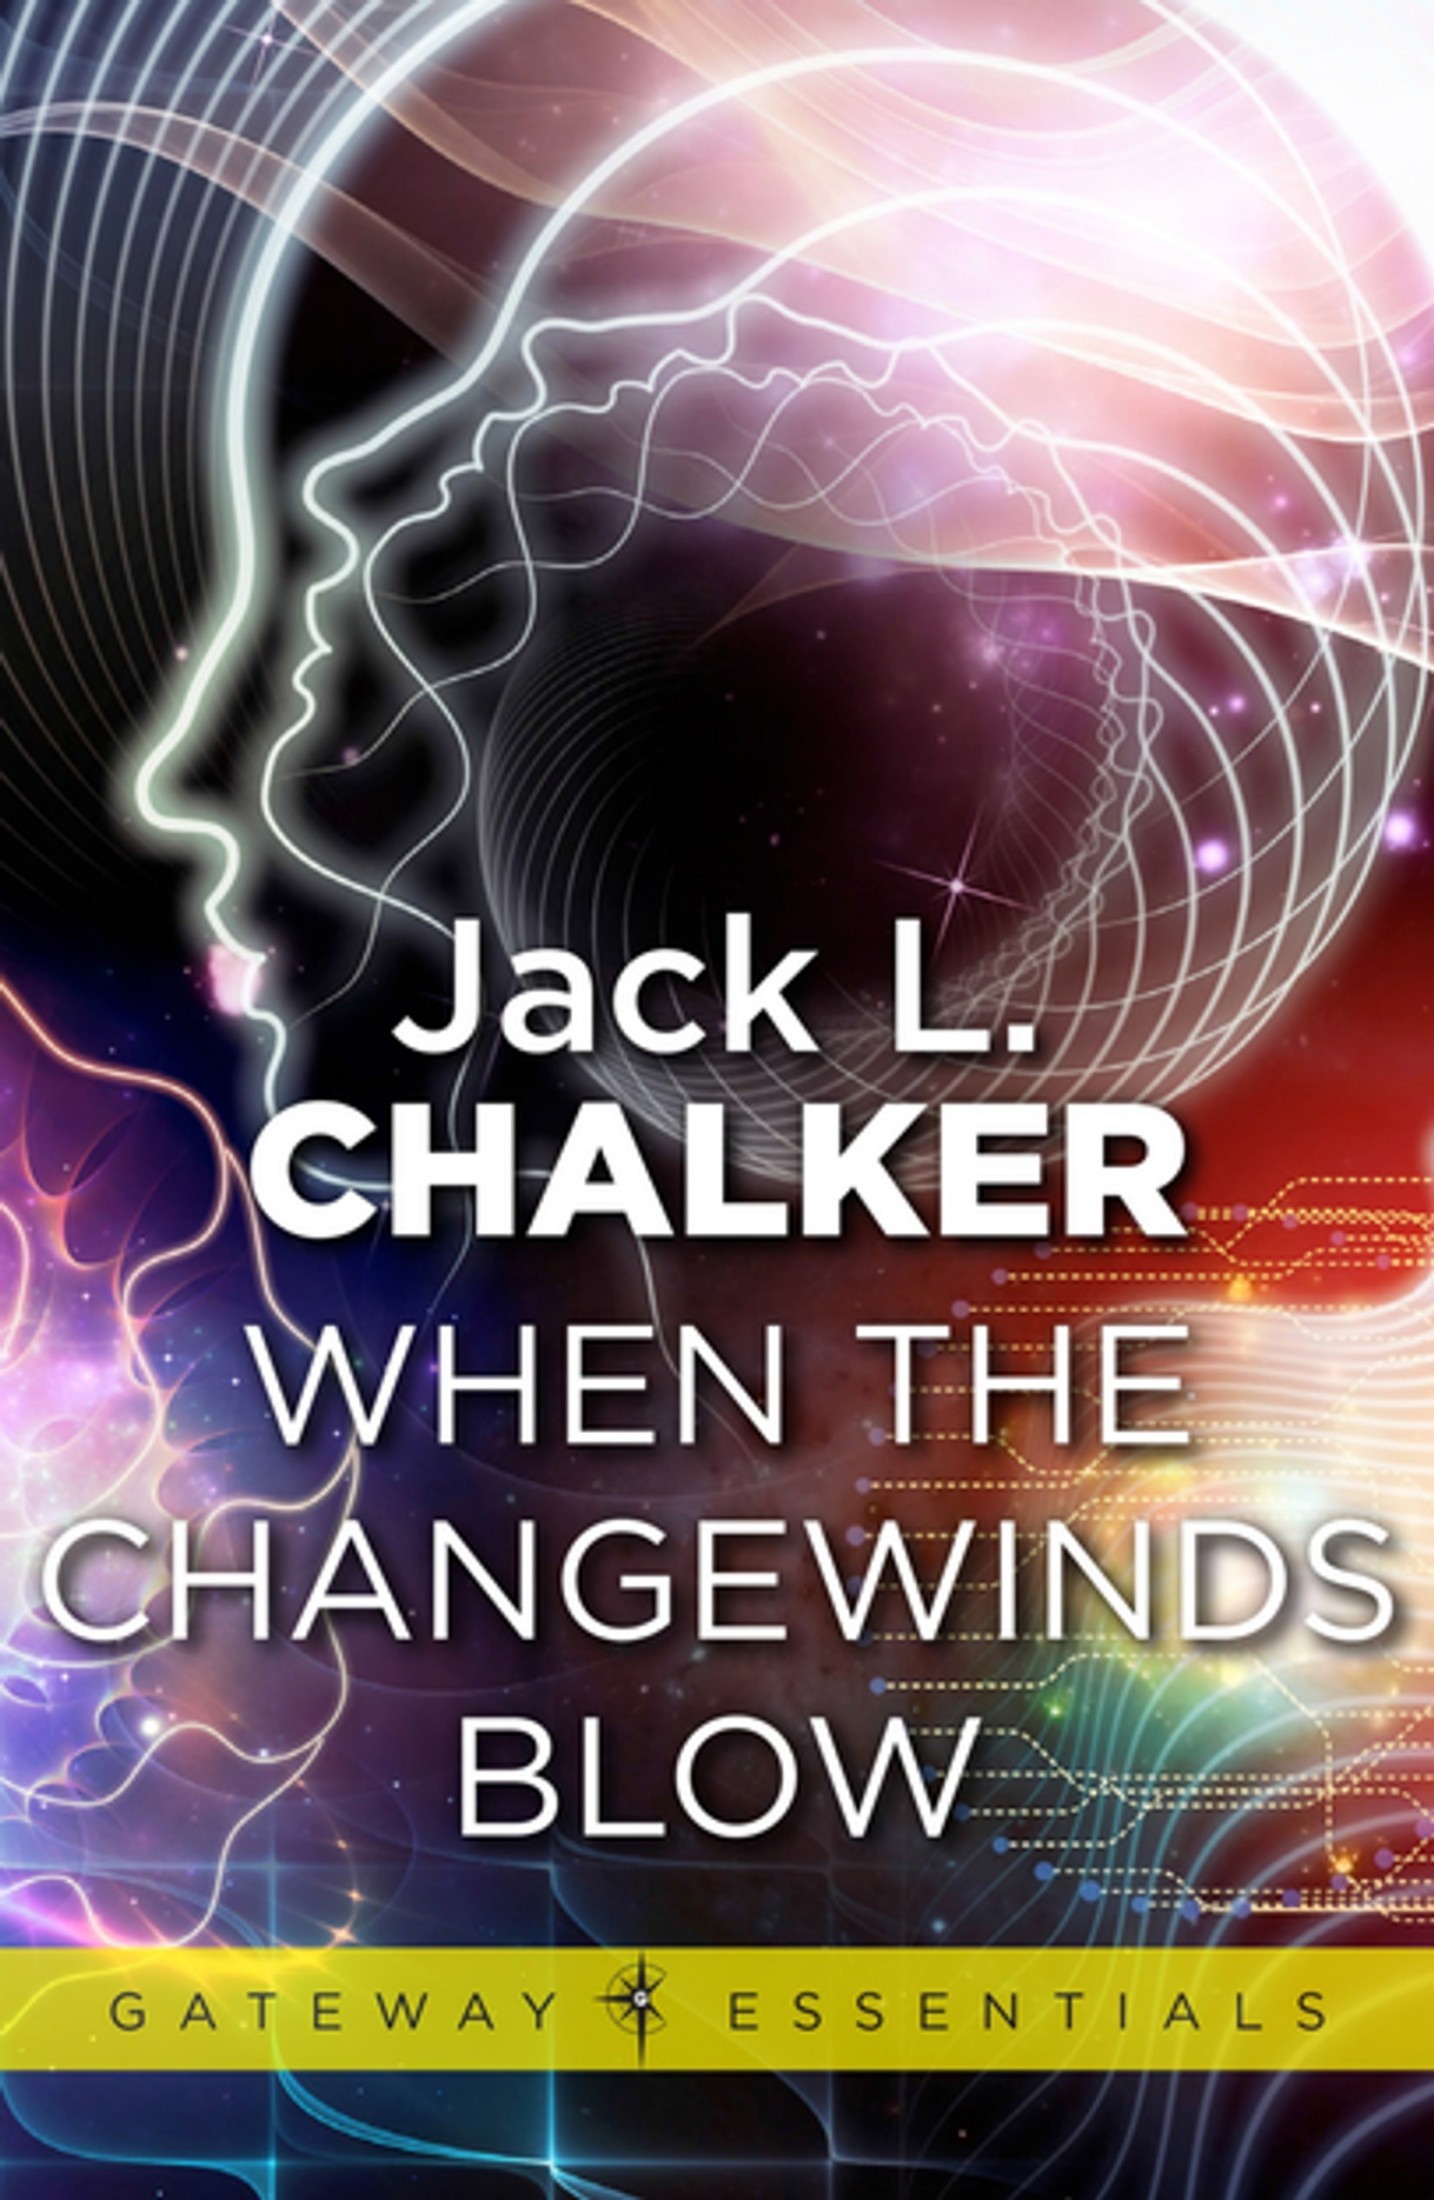 The Changewinds